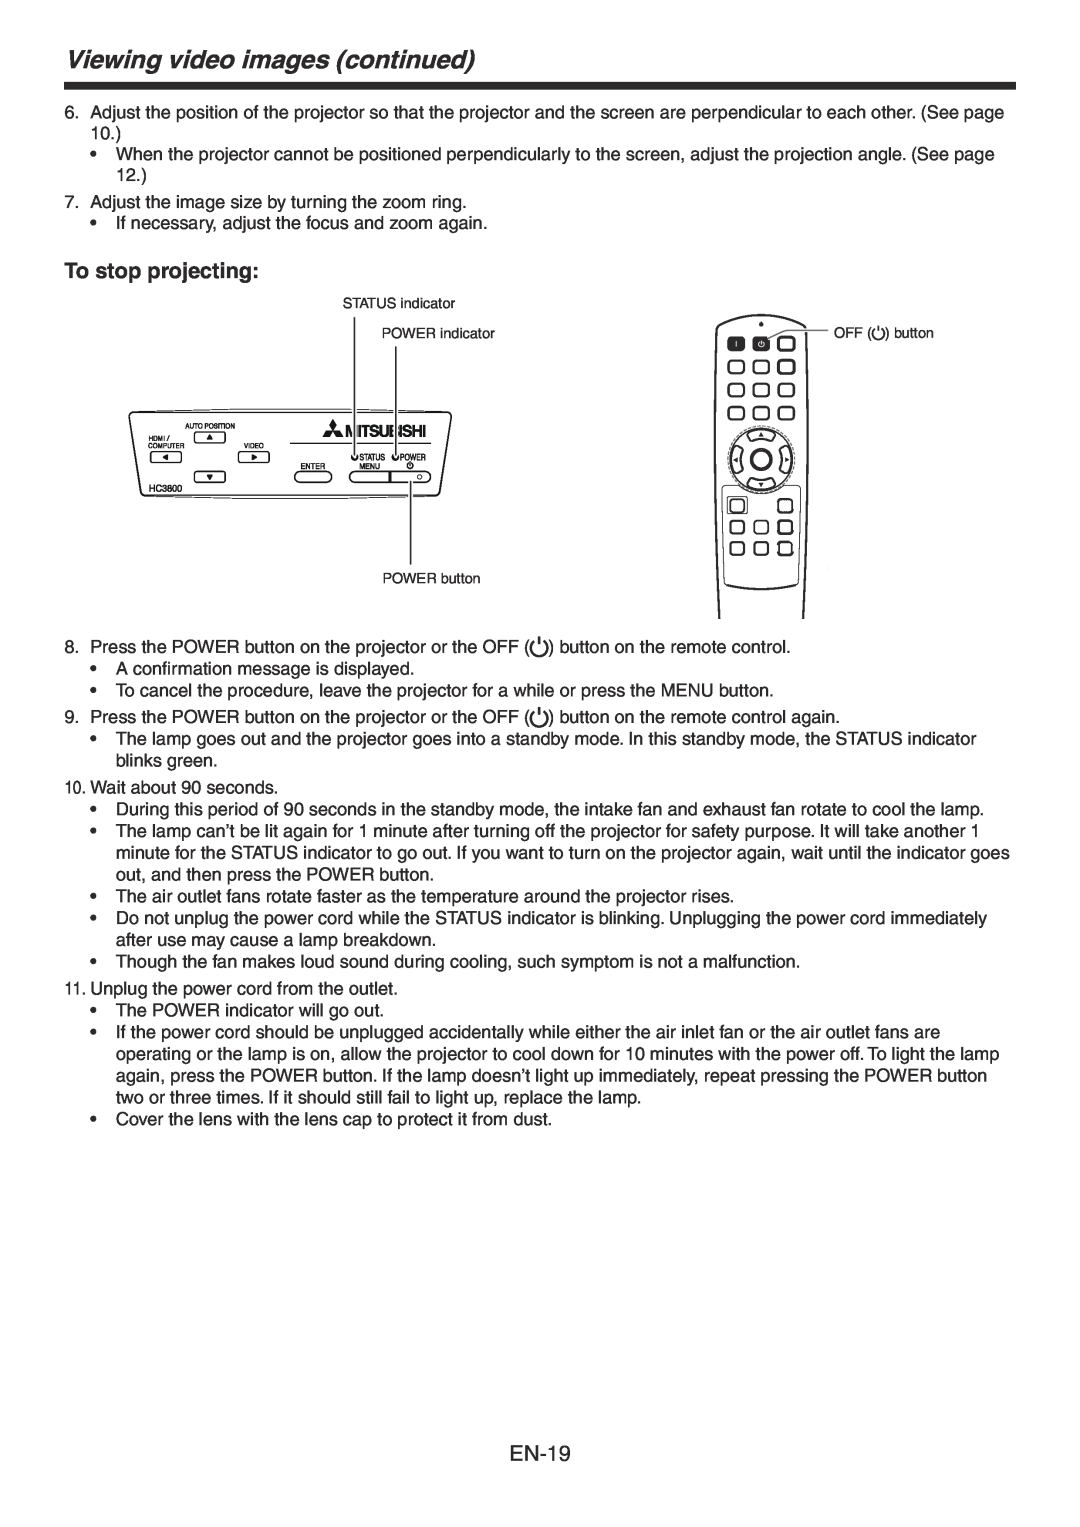 Mitsubishi Electronics HC3800 user manual To stop projecting, Viewing video images continued, EN-19 